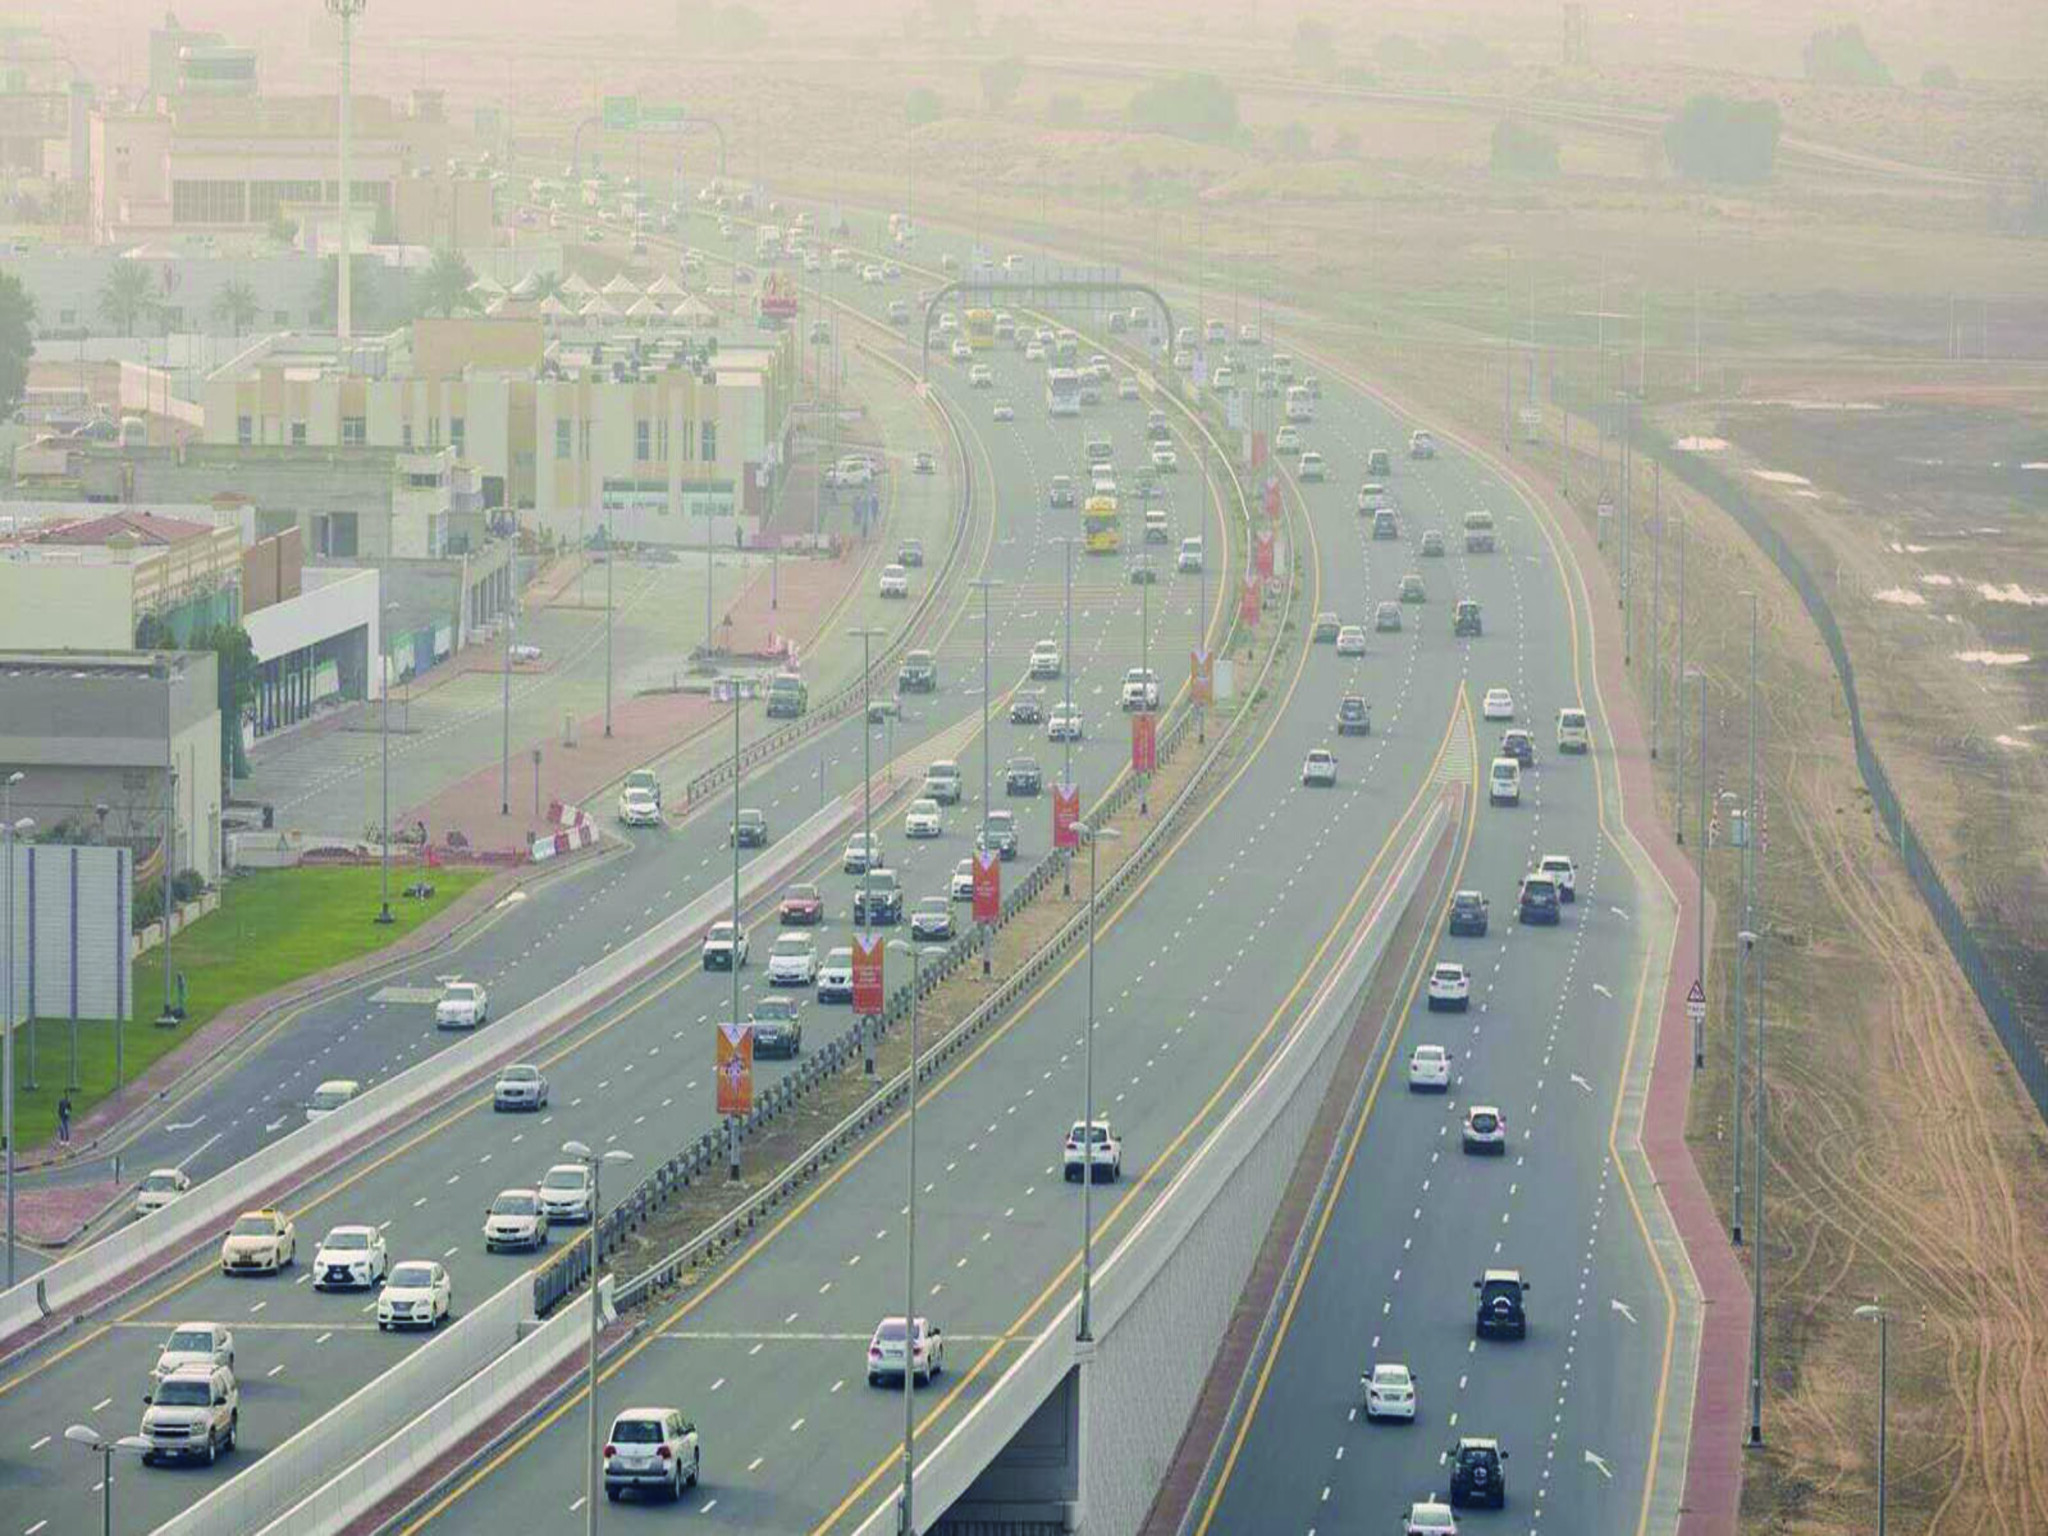 The Meteorological Department warns residents of the UAE of light rain today